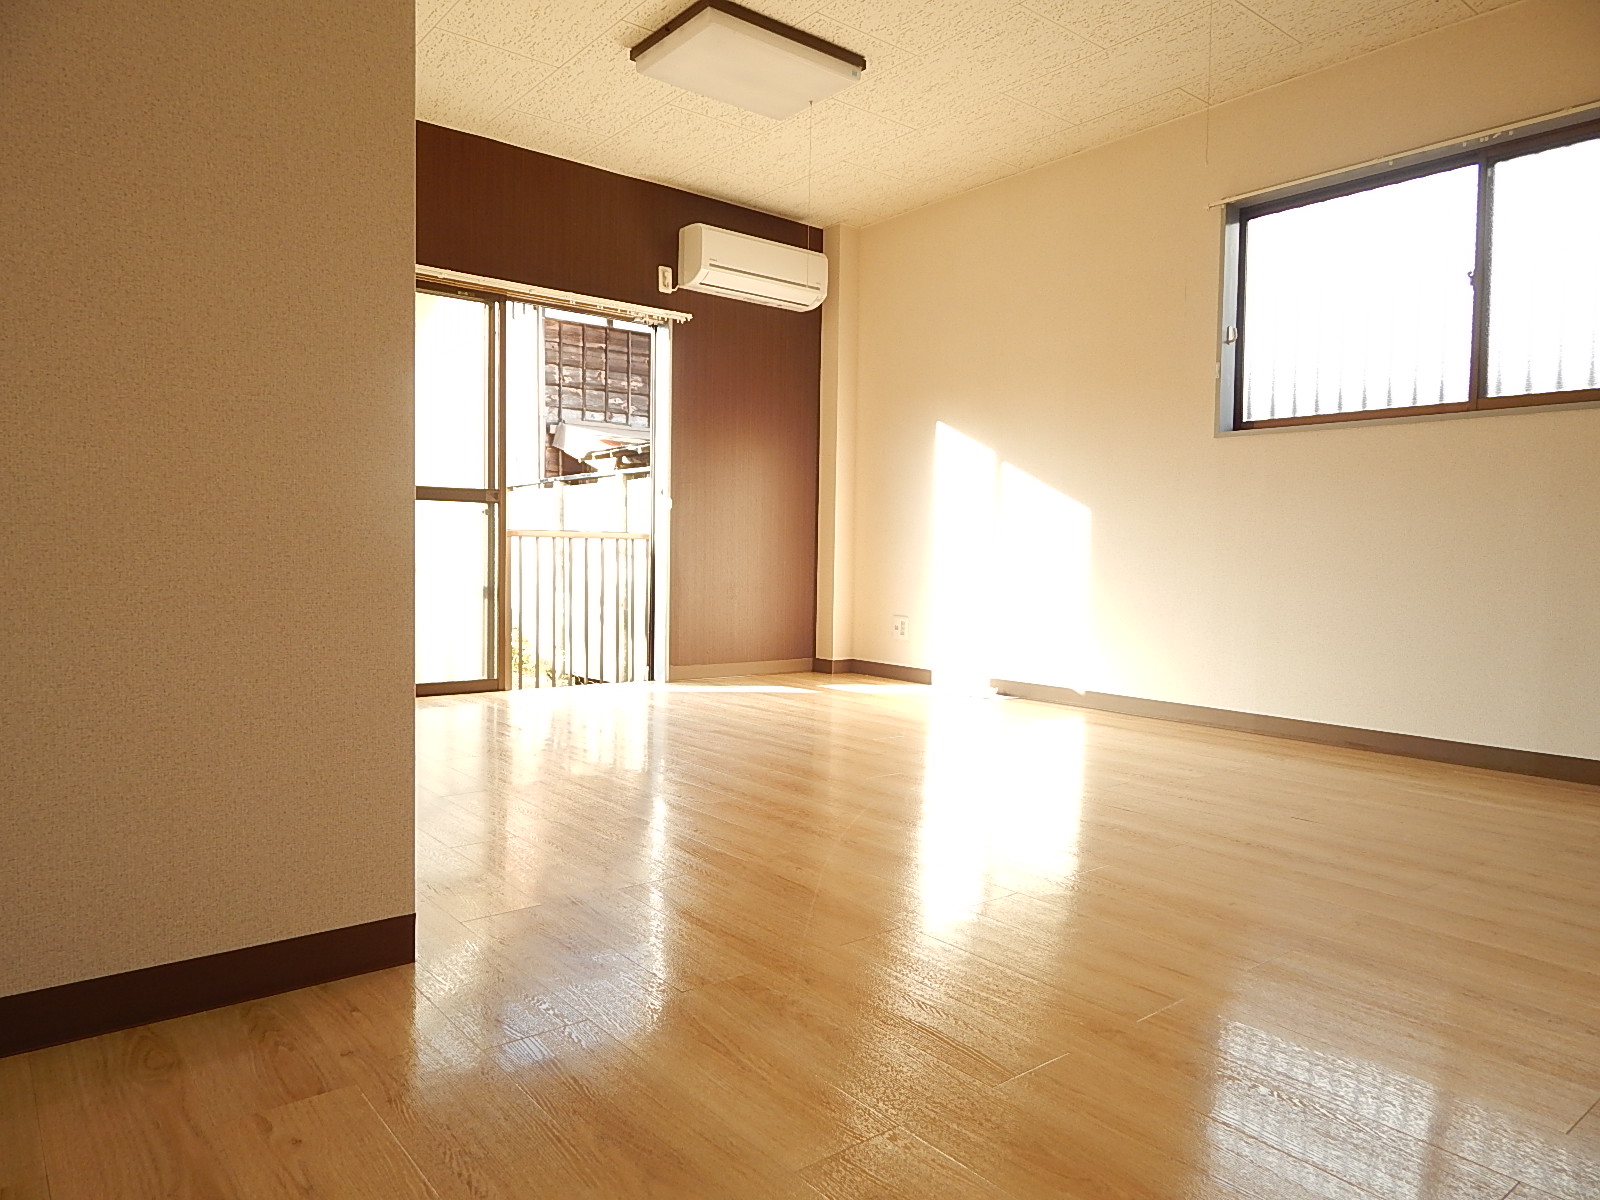 Living and room. It is a bright room with two-sided window in the corner room